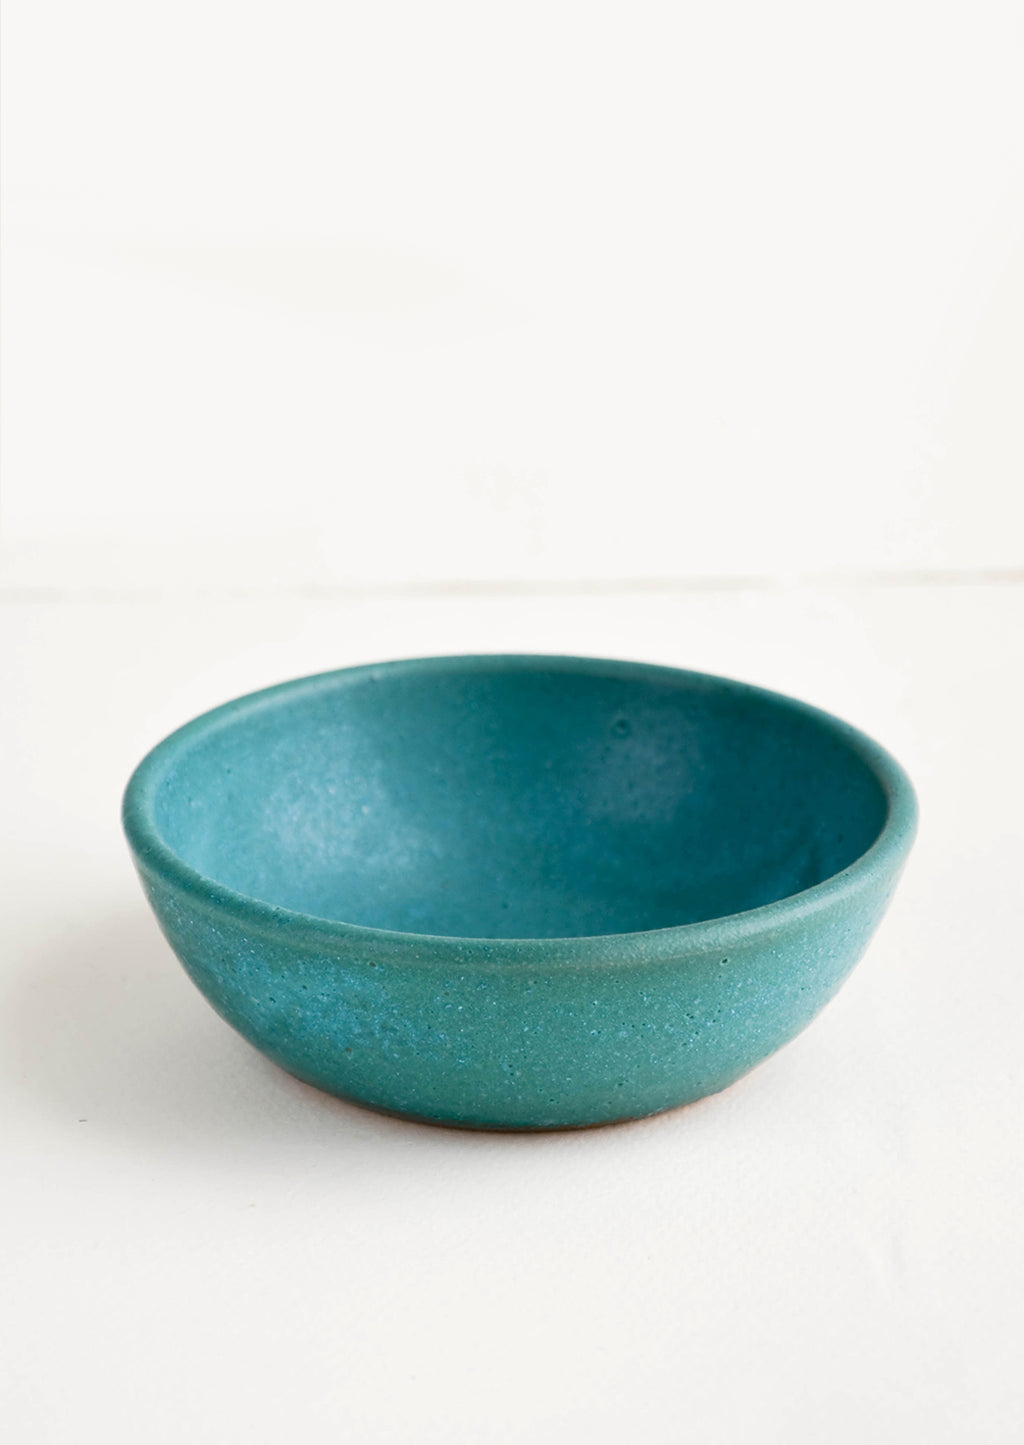 Pinch Bowl / Rustic Turquoise:  Small, handmade ceramic pinch bowl in rustic turquoise glaze